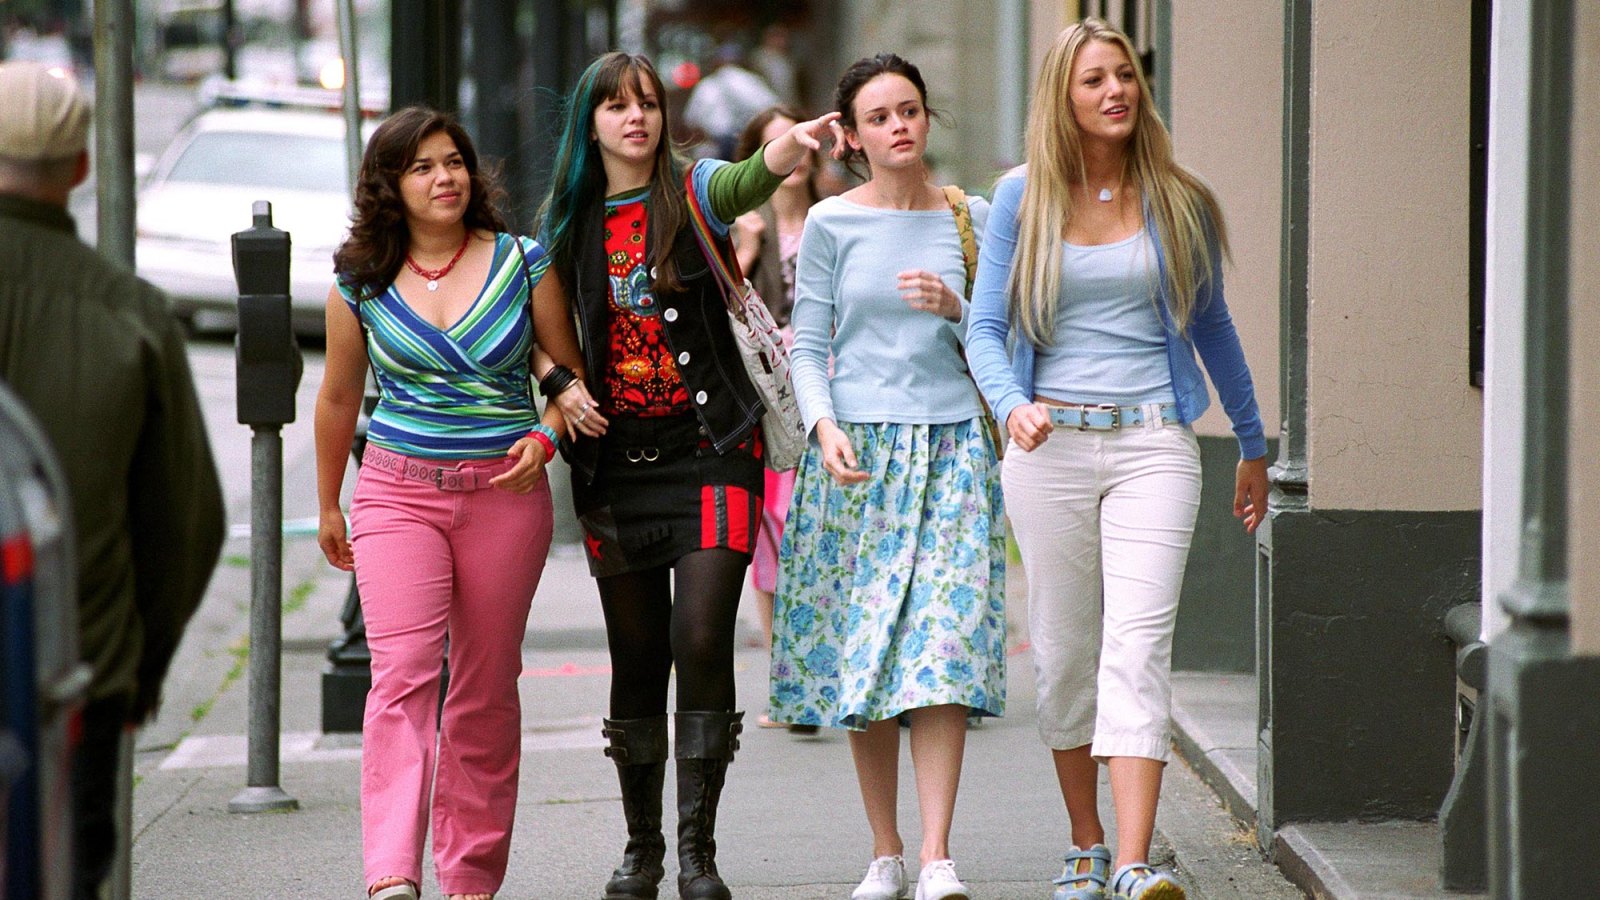 Sisterhood of the Traveling Pants Cast Is All Smiles During Reunion Nearly 20 Years After 1st Film